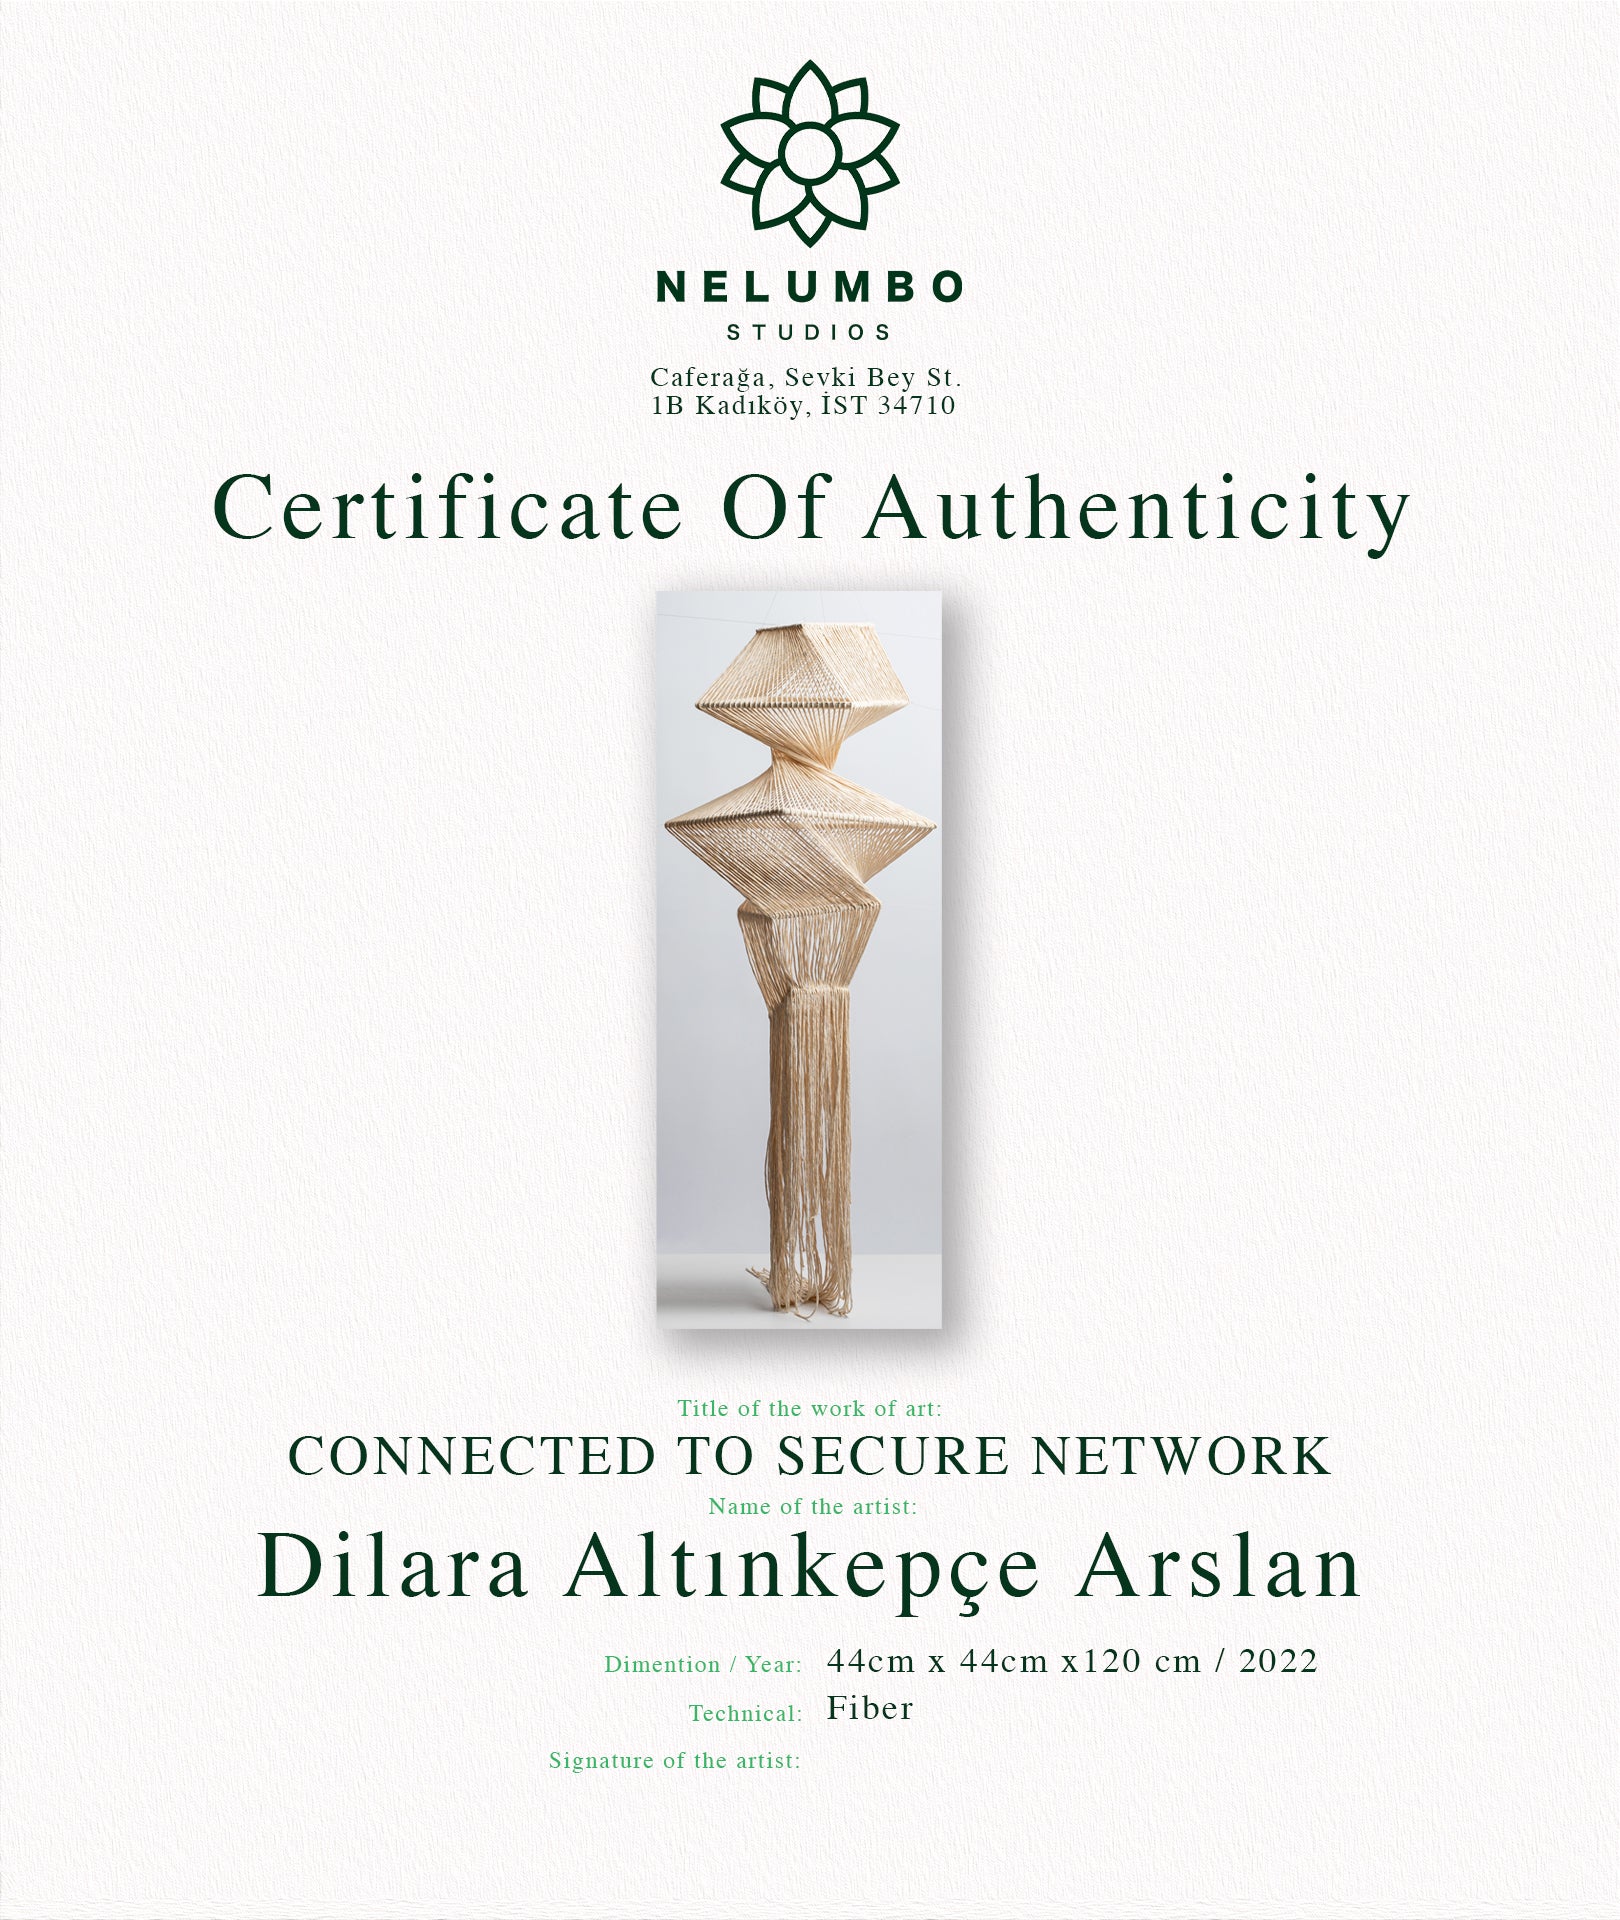 Connected to secure network